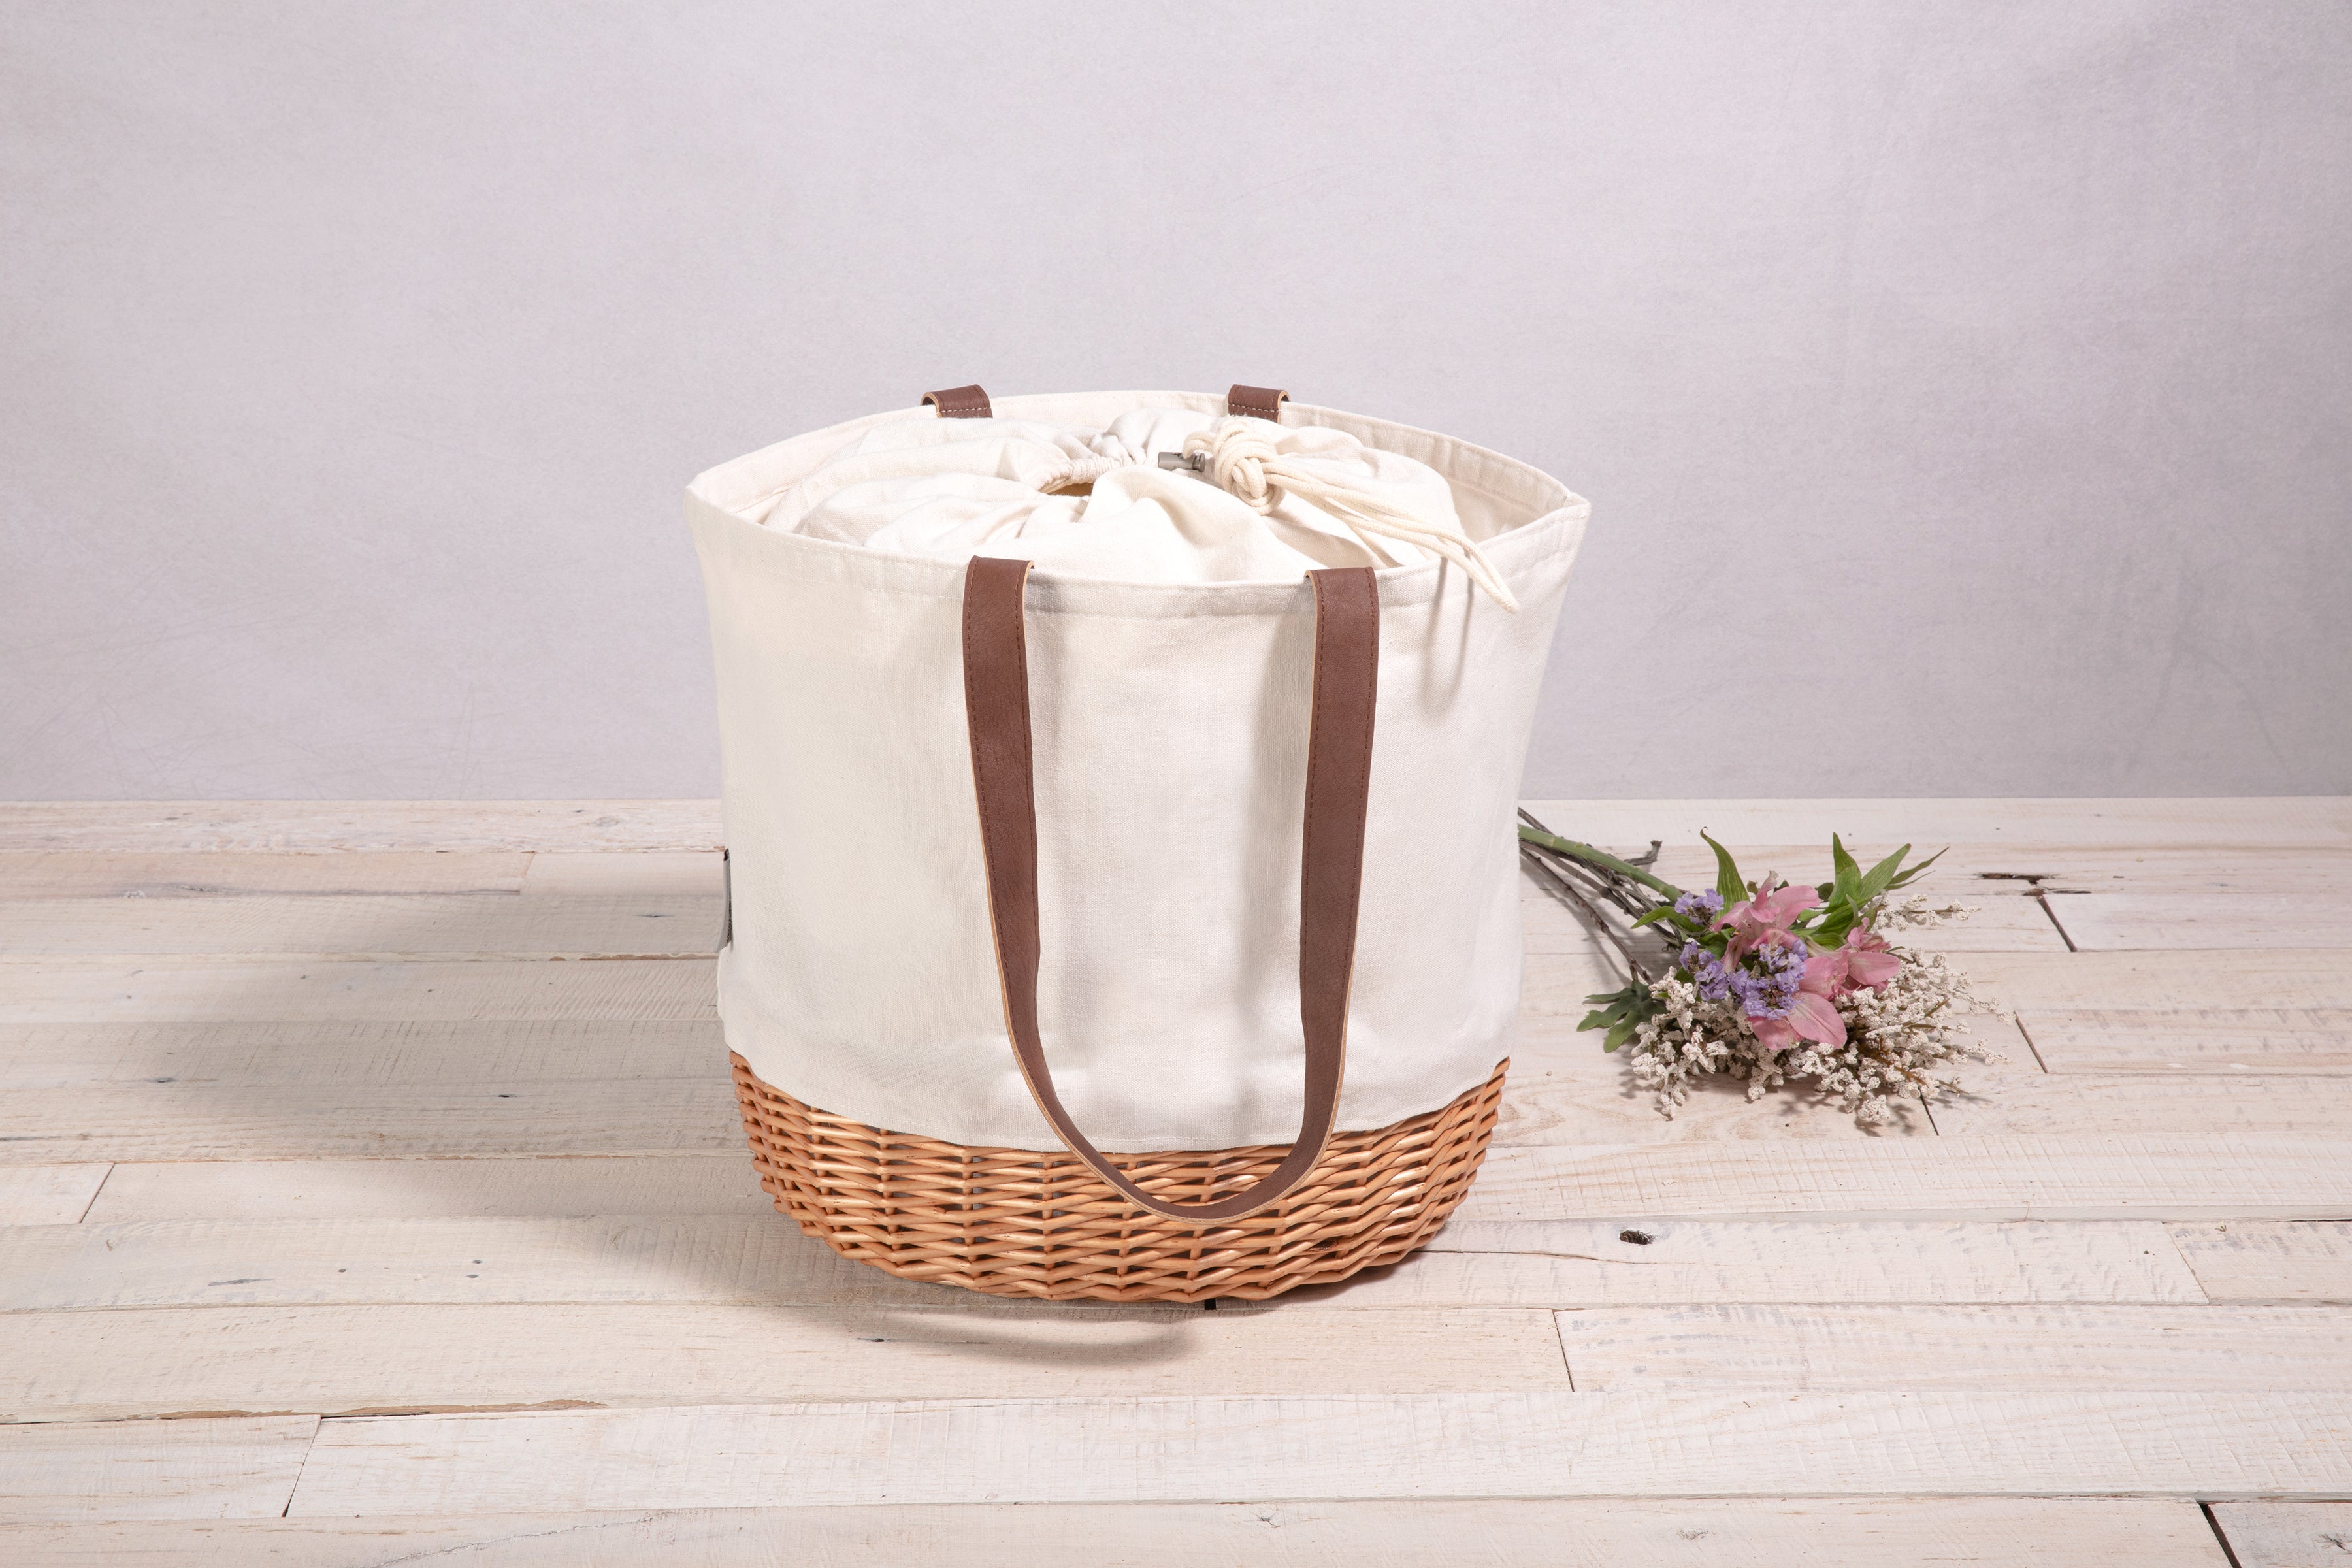 Stanford Cardinal - Coronado Canvas and Willow Basket Tote